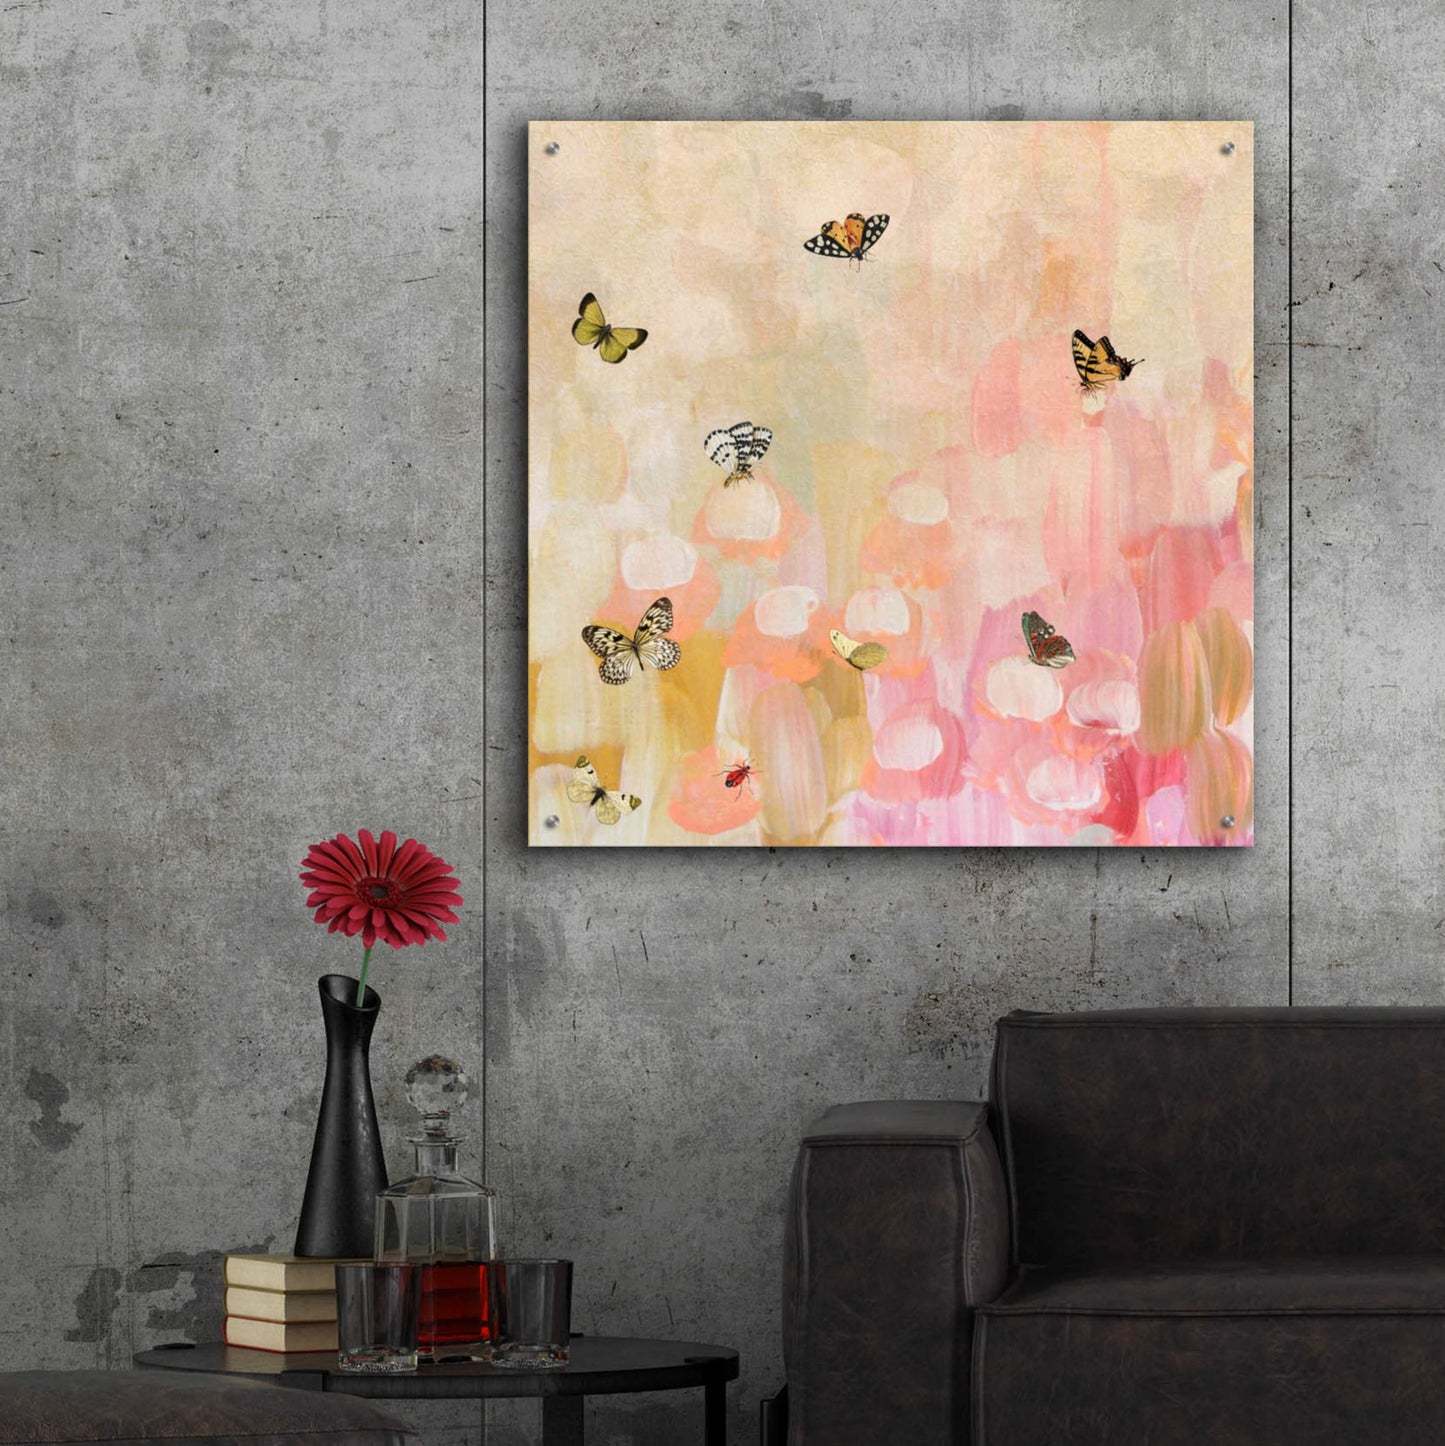 Epic Art 'Butterfly by 7' by Karen Smith Acrylic Glass Wall Art,36x36